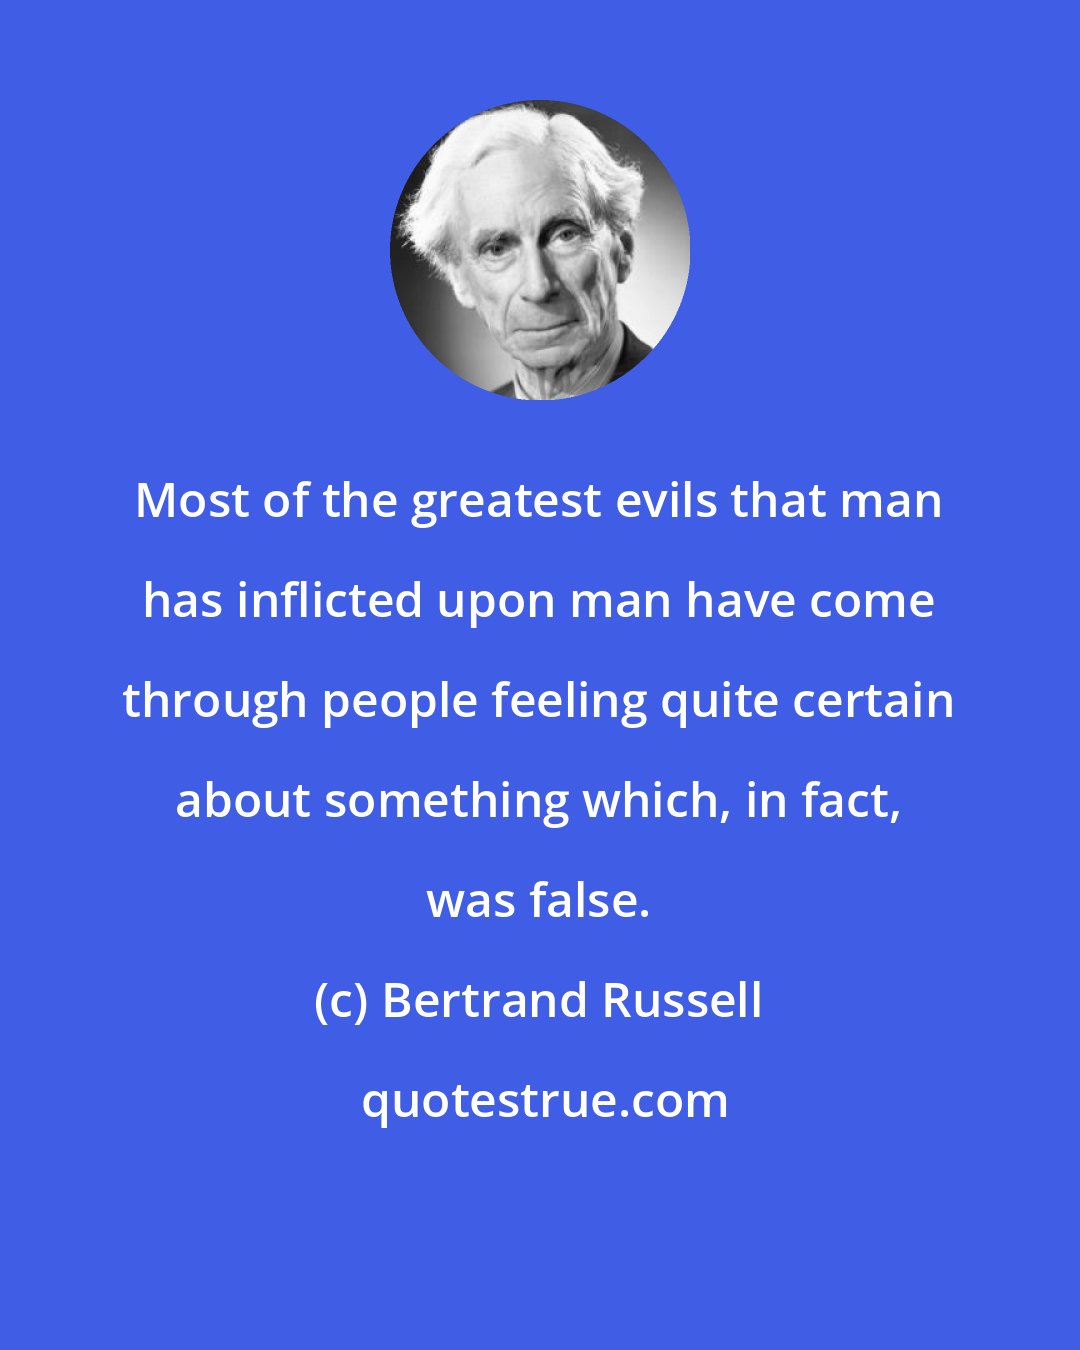 Bertrand Russell: Most of the greatest evils that man has inflicted upon man have come through people feeling quite certain about something which, in fact, was false.